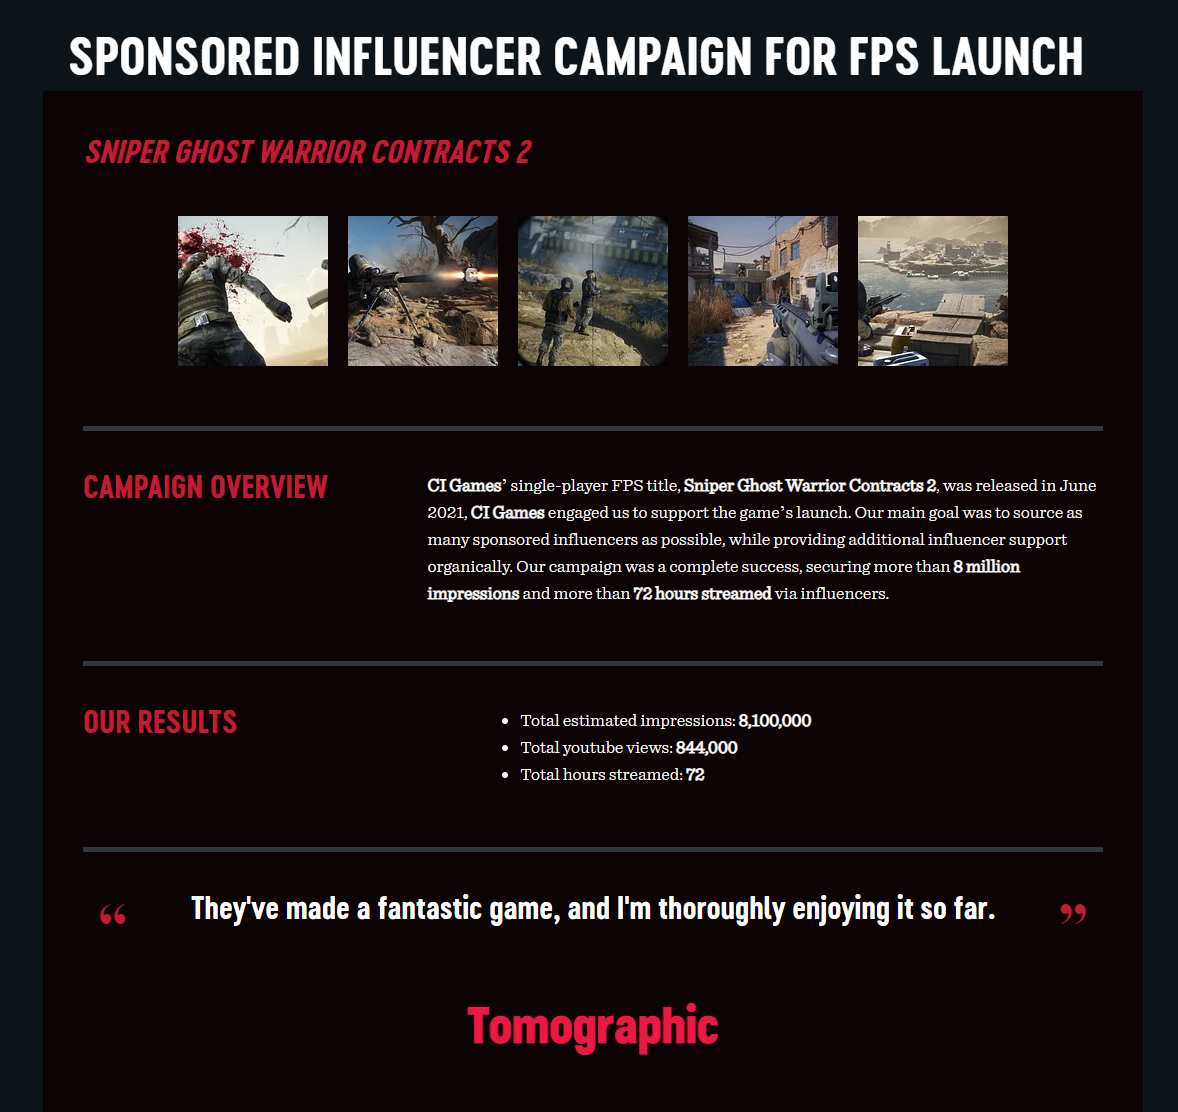 sniper ghost influencer campaign